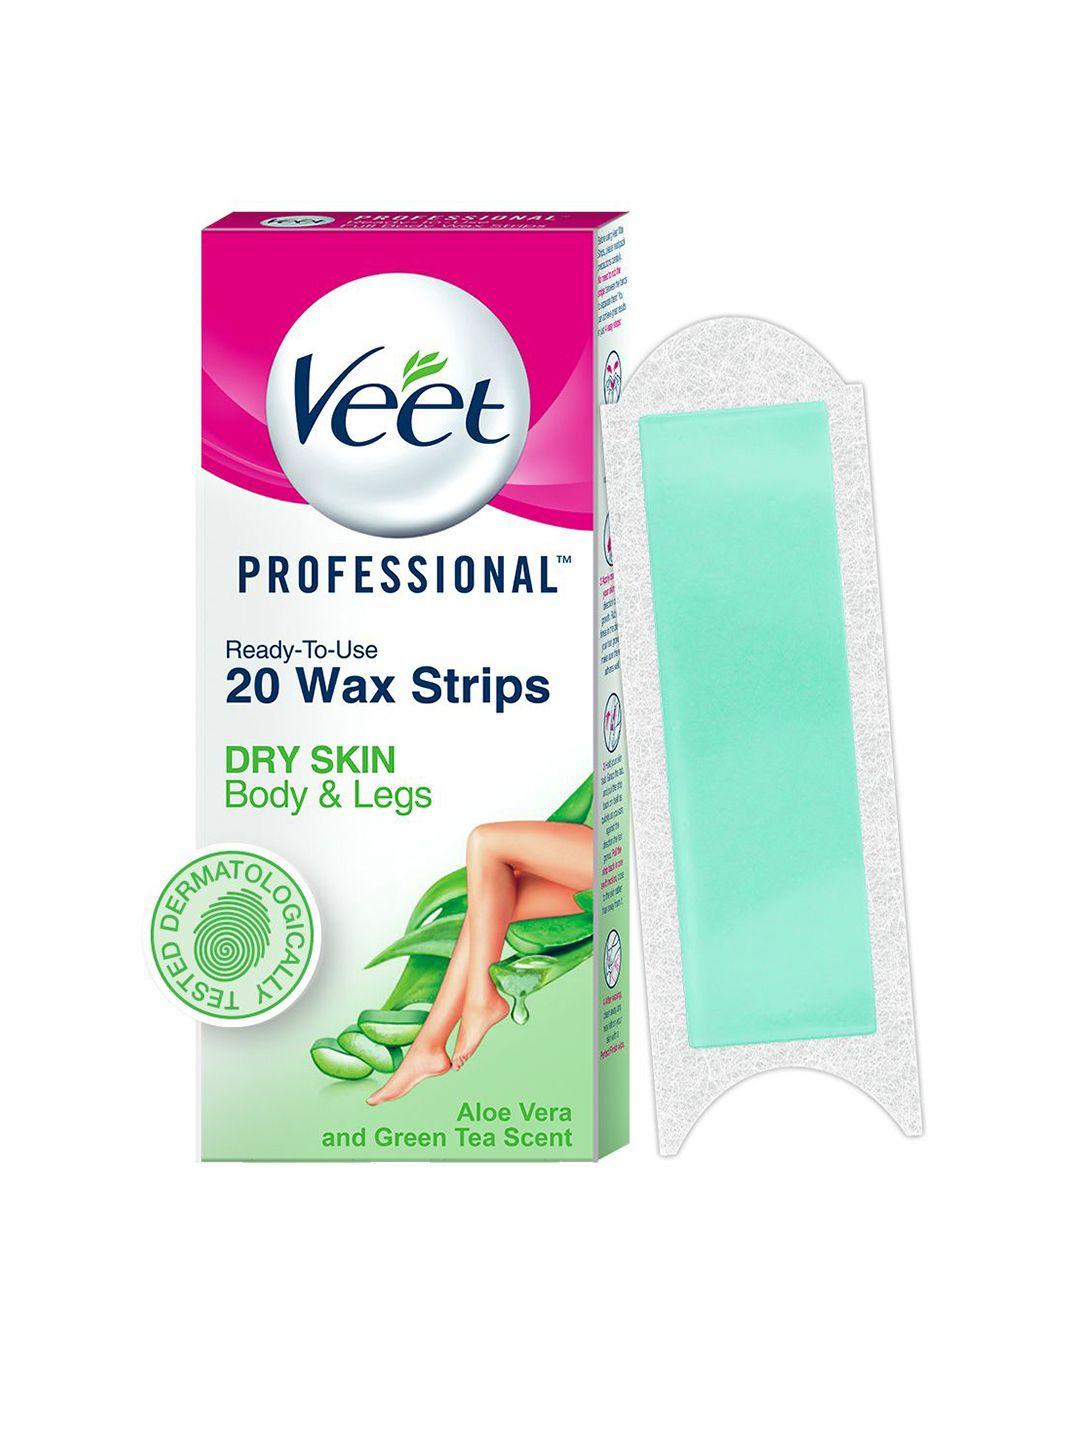 veet professional waxing strips for dry skin - 20 strips